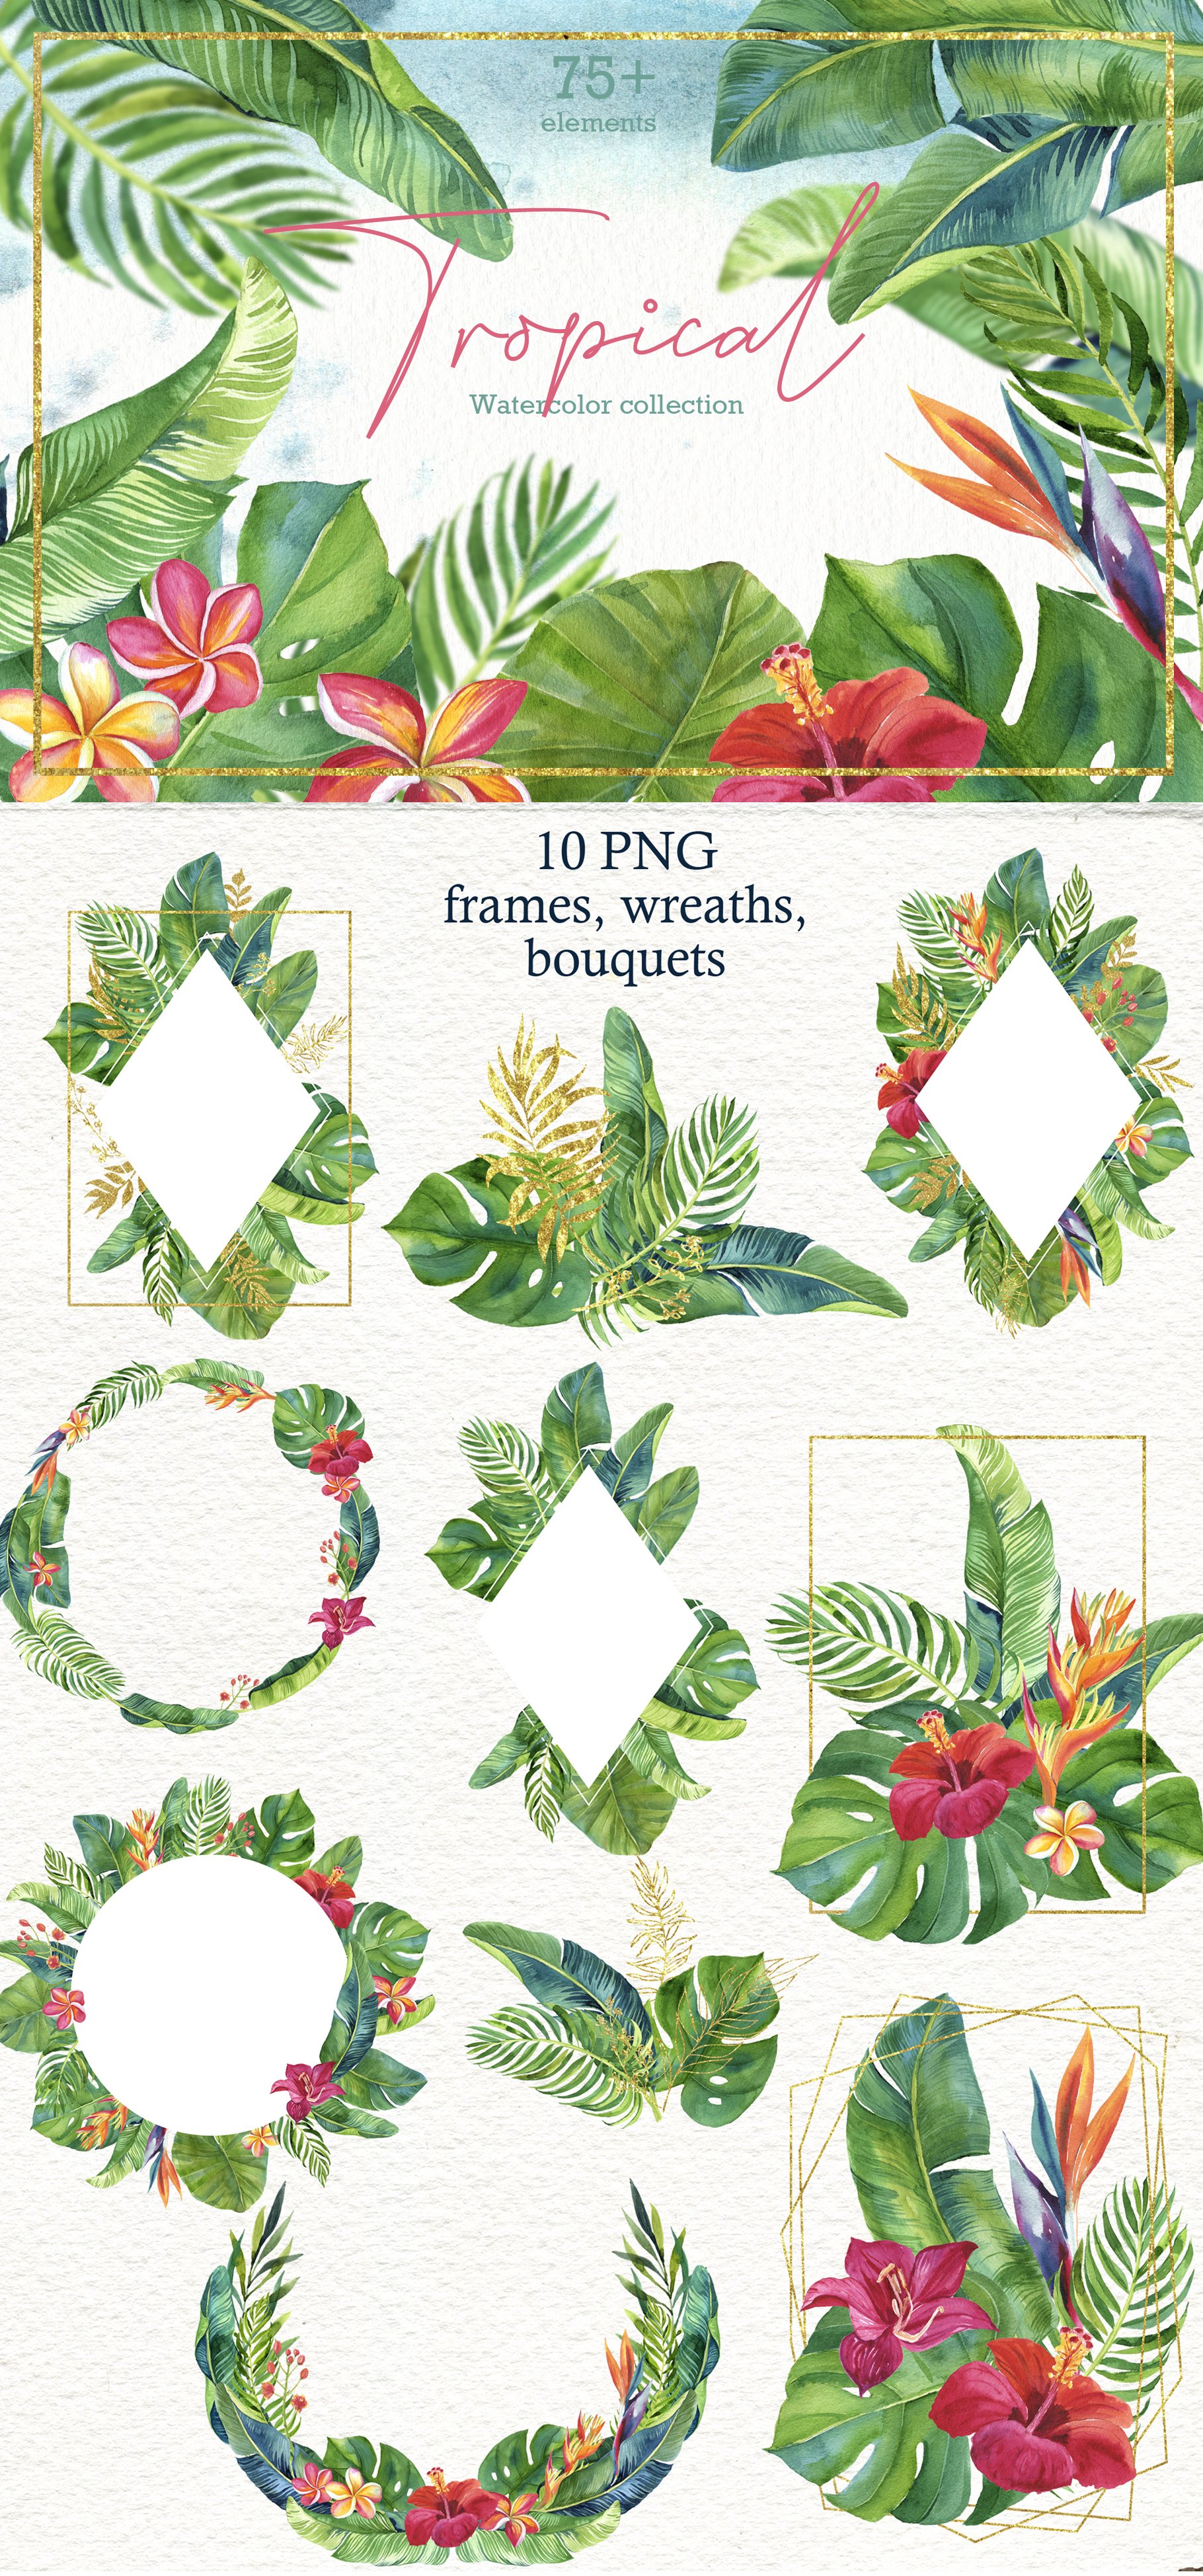 Tropic leaves&flowers Watercolor set cover image.